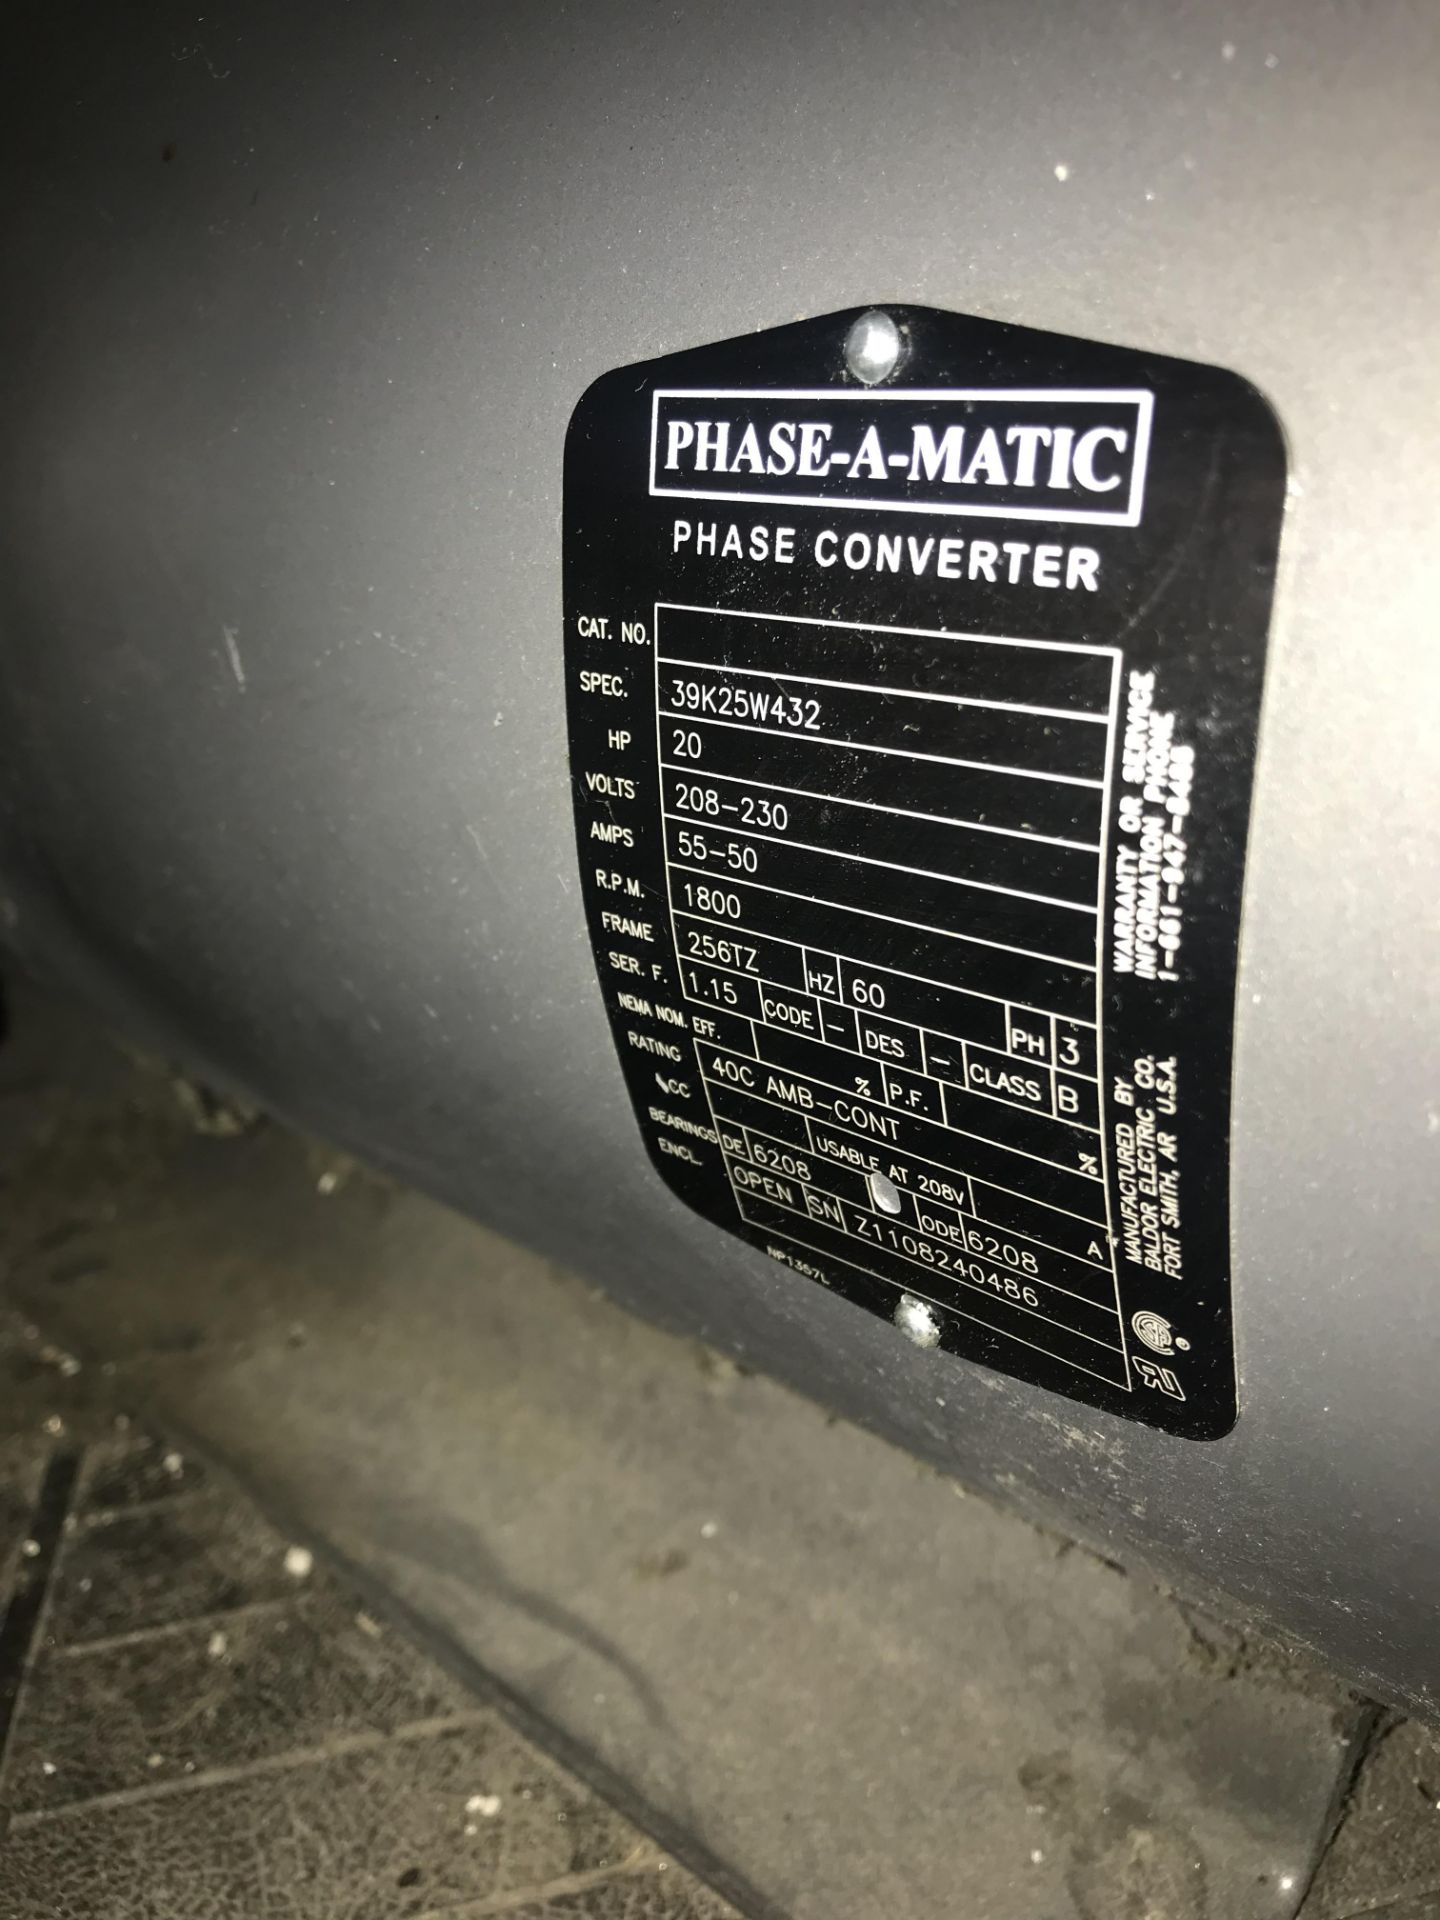 PHASE-A-MATIC PHASE CONVERTER, MODEL R40, 40 HP, SN: K039, PHASE-A-MATIC PHASE CONVERTER, MODEL R20, - Image 3 of 4